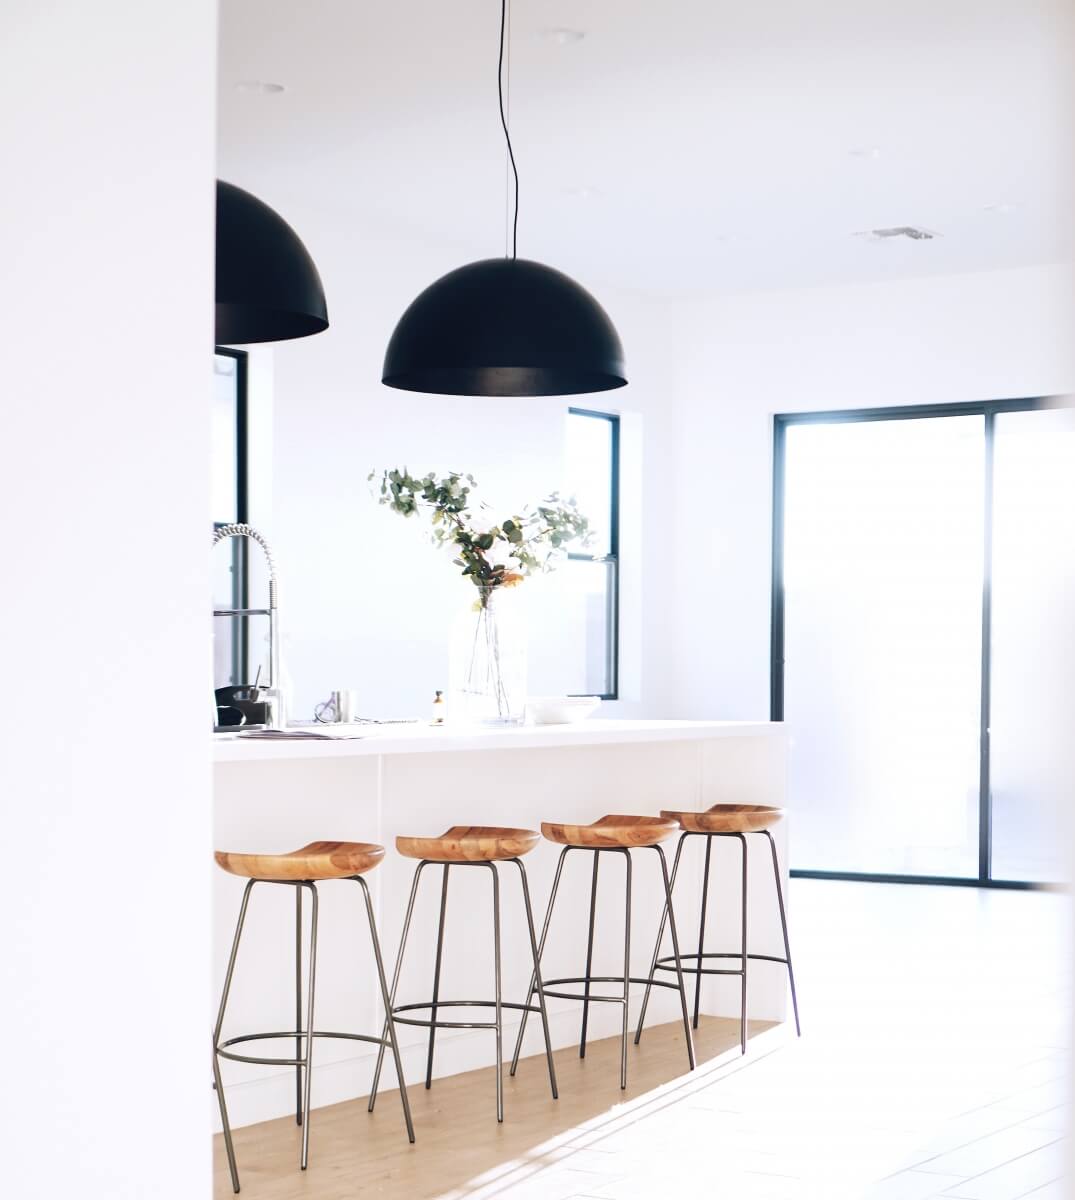 An example of a kitchen design trend. Two overzied black light shades on pendant lights over a kitchen island. Kitchen design trends to consider.